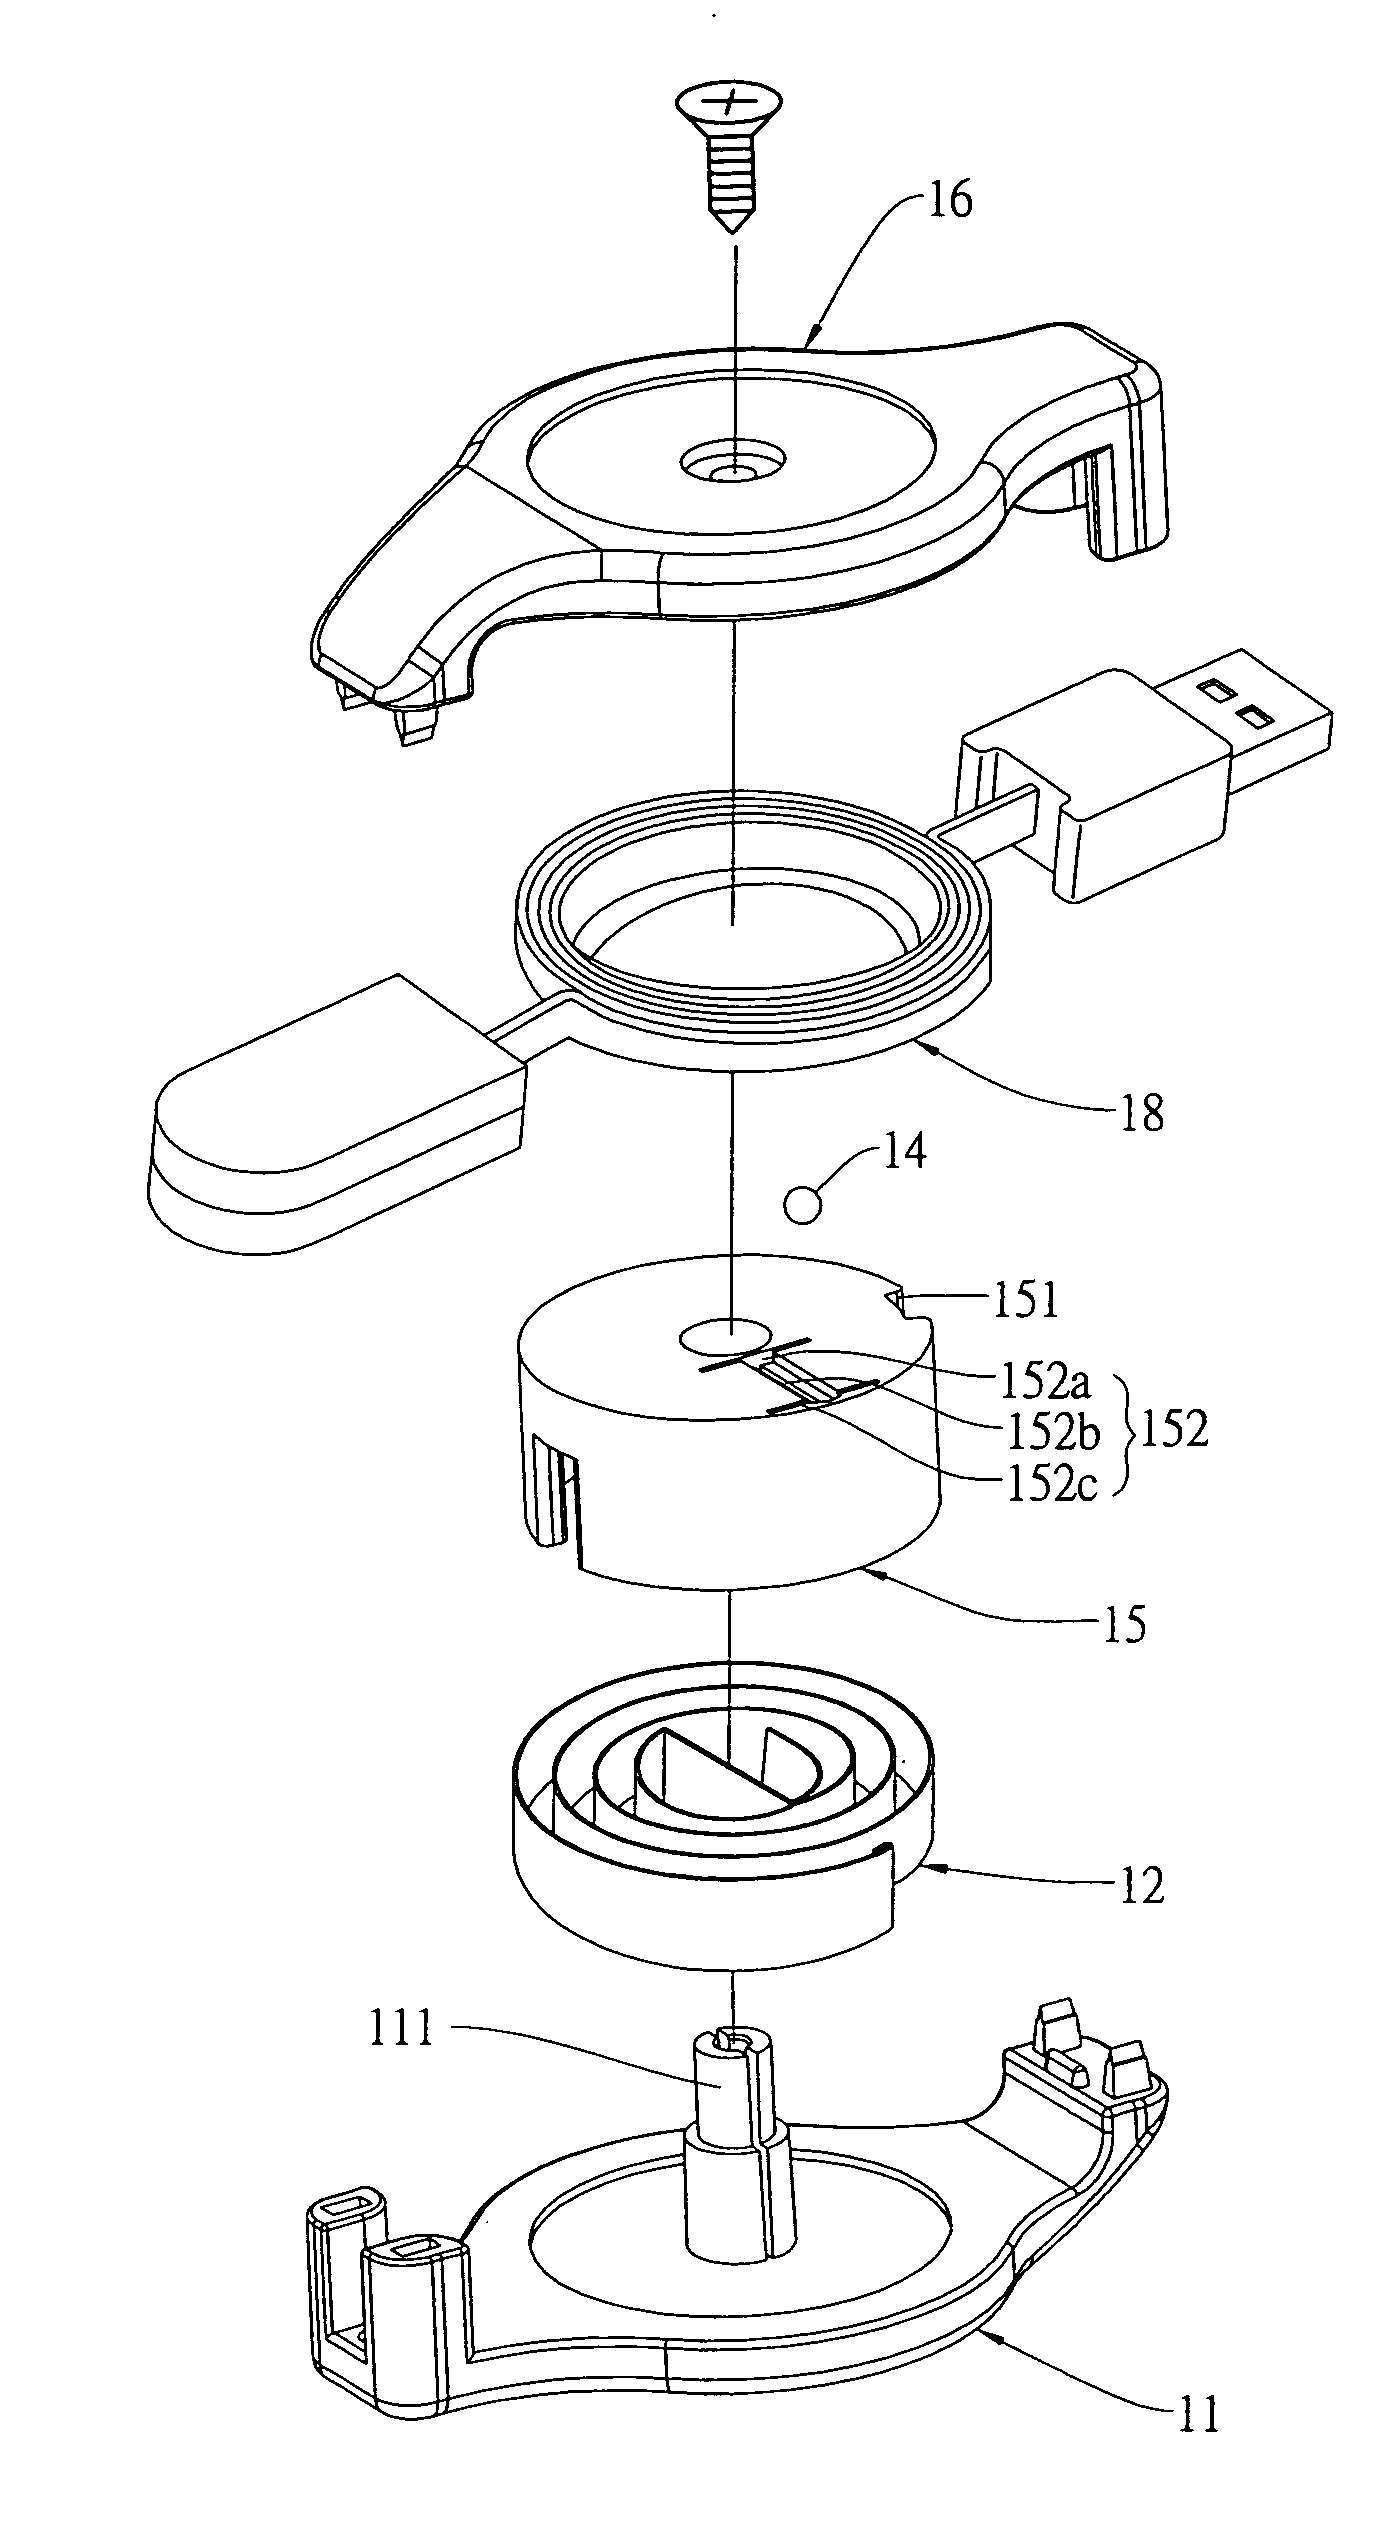 Automatically lockable cable rewinding structure